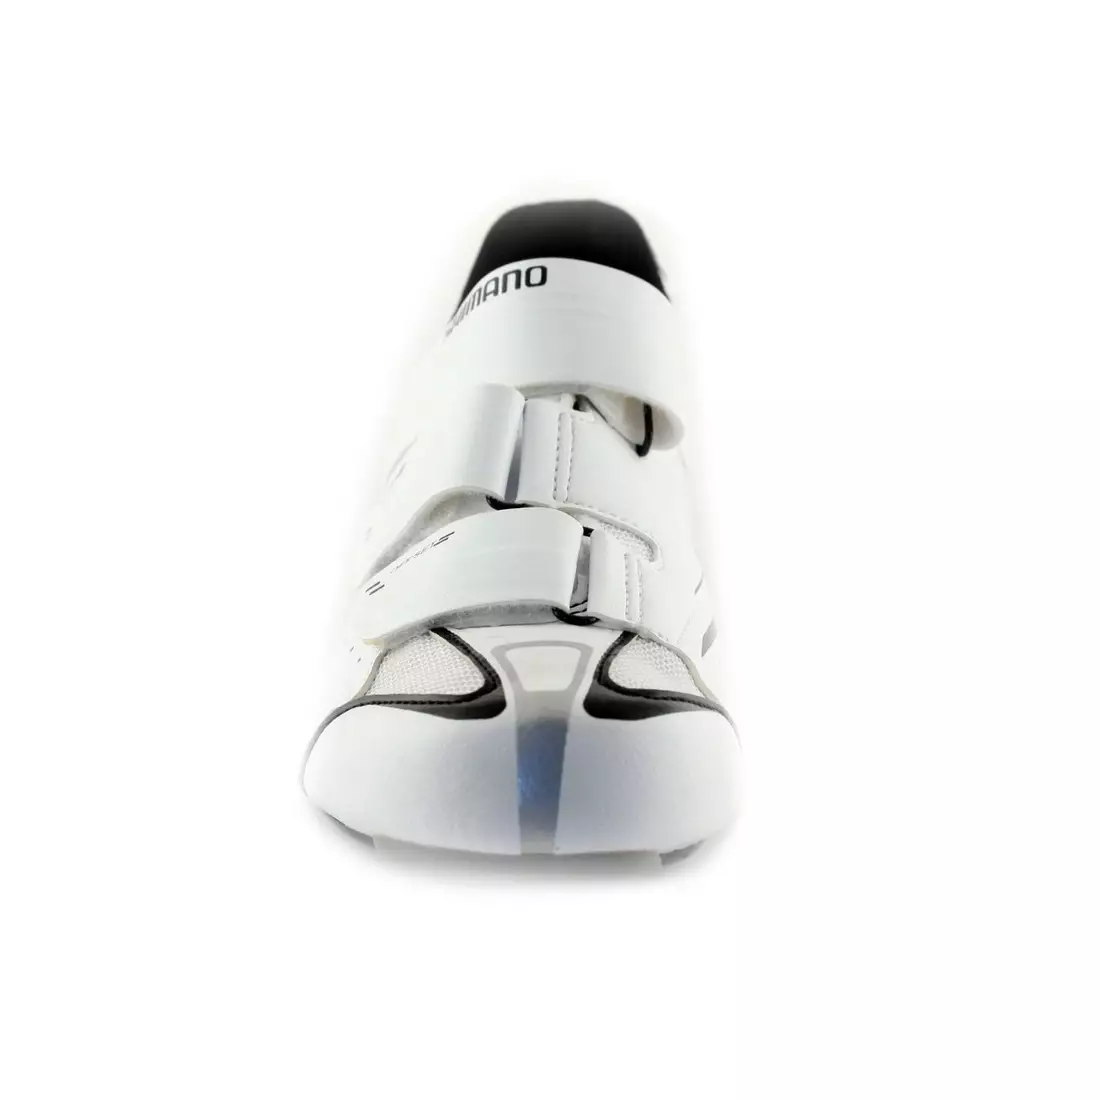 SHIMANO SH-R078 - road shoes, color: white